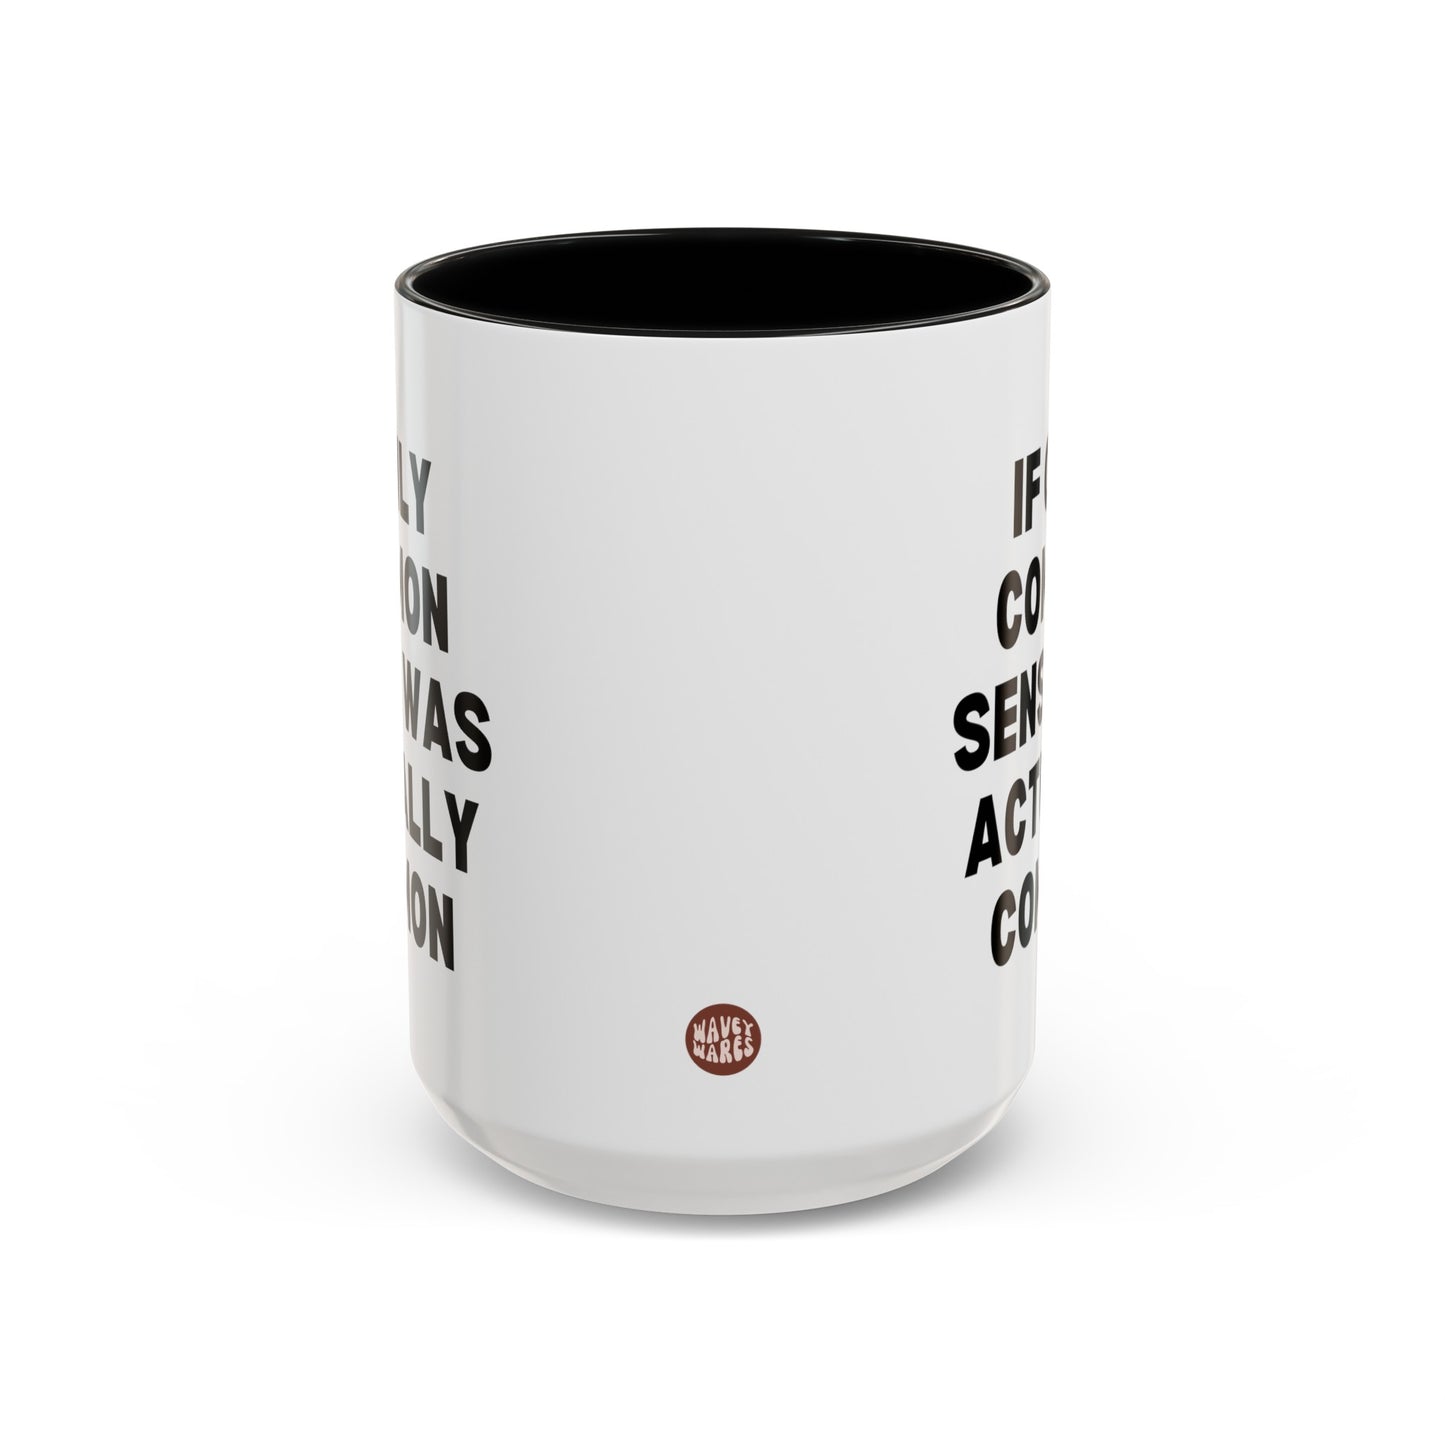 If Only Common Sense Was Actually Common 15oz white with black accent funny large coffee mug gift for morning person coworker secret santa sarcasm sarcastic waveywares wavey wares wavywares wavy wares side